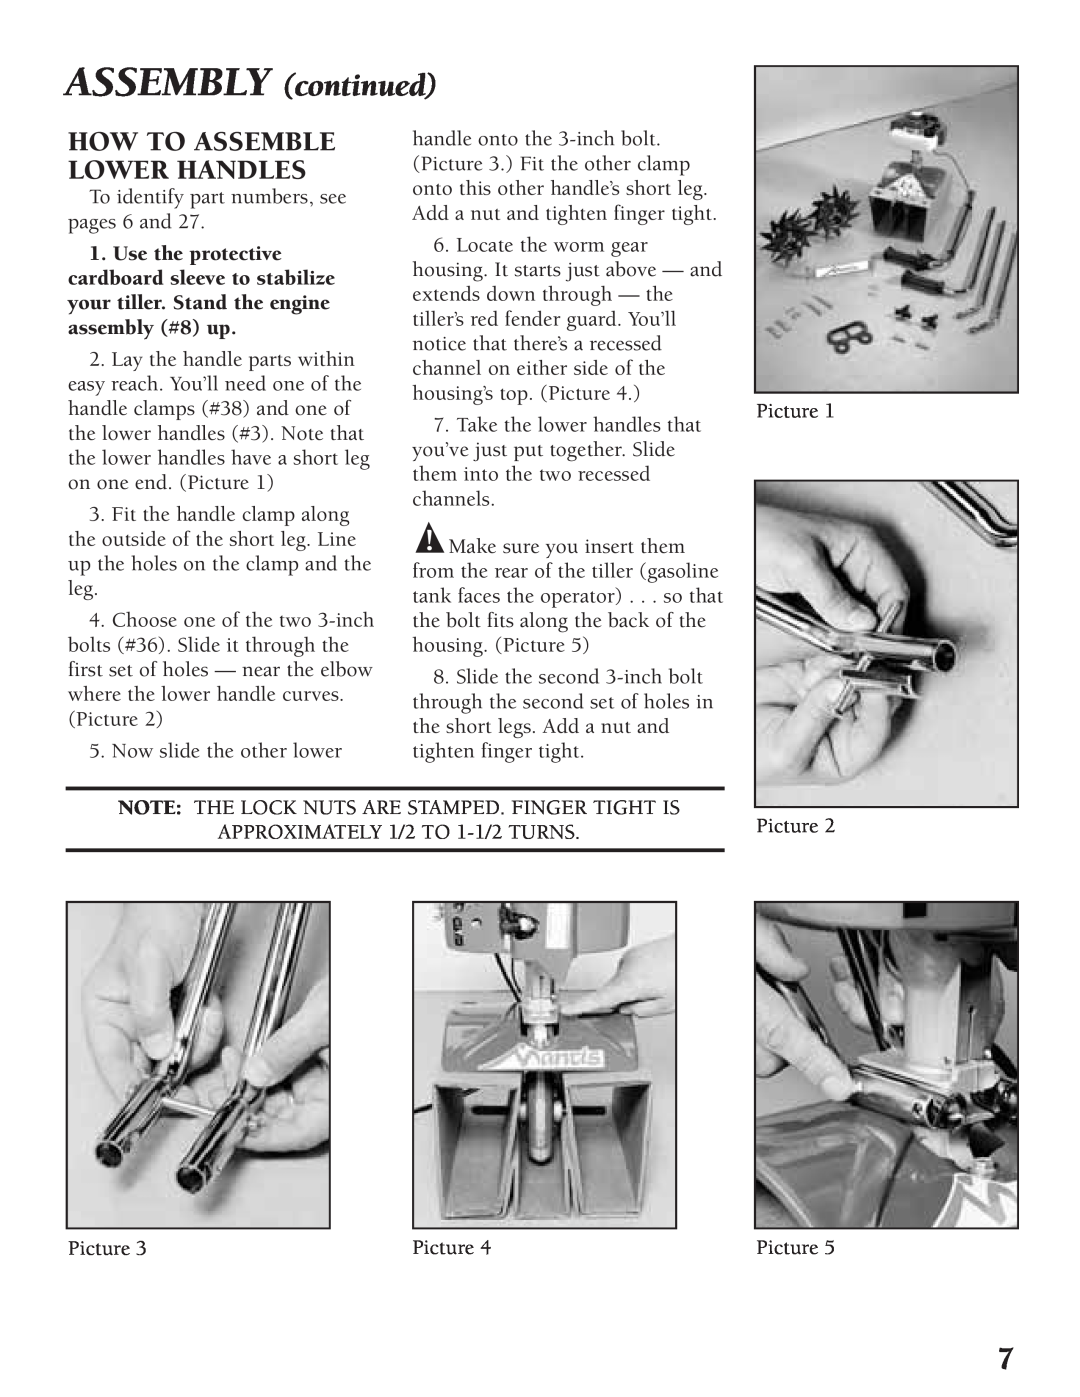 Little Wonder Tiller/Cultivator owner manual ASSEMBLY continued, How To Assemble Lower Handles 